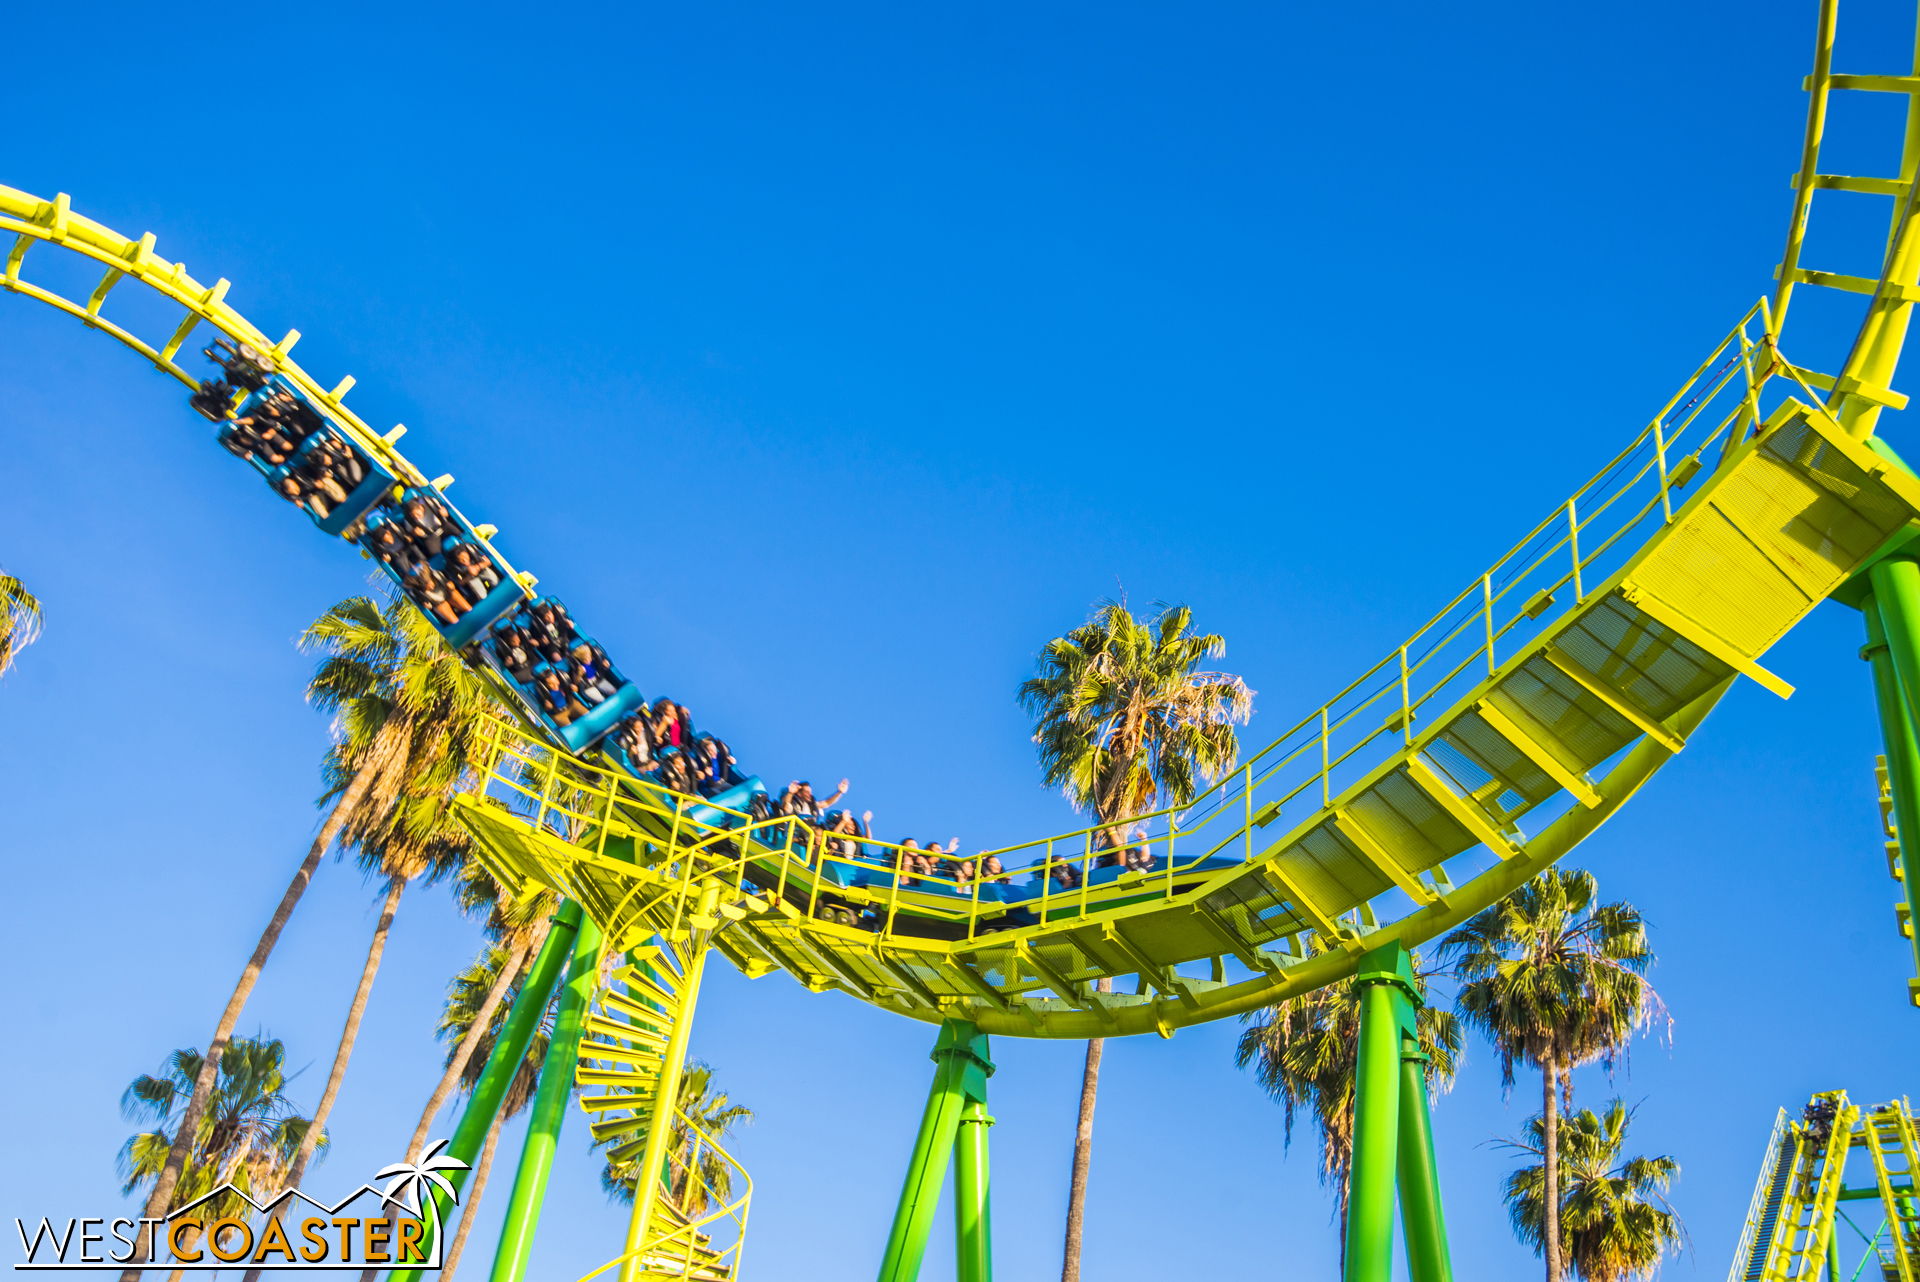  Still, for many, Boomerang has been a fixture at Knott's Berry Farm for most or all of their lives. 